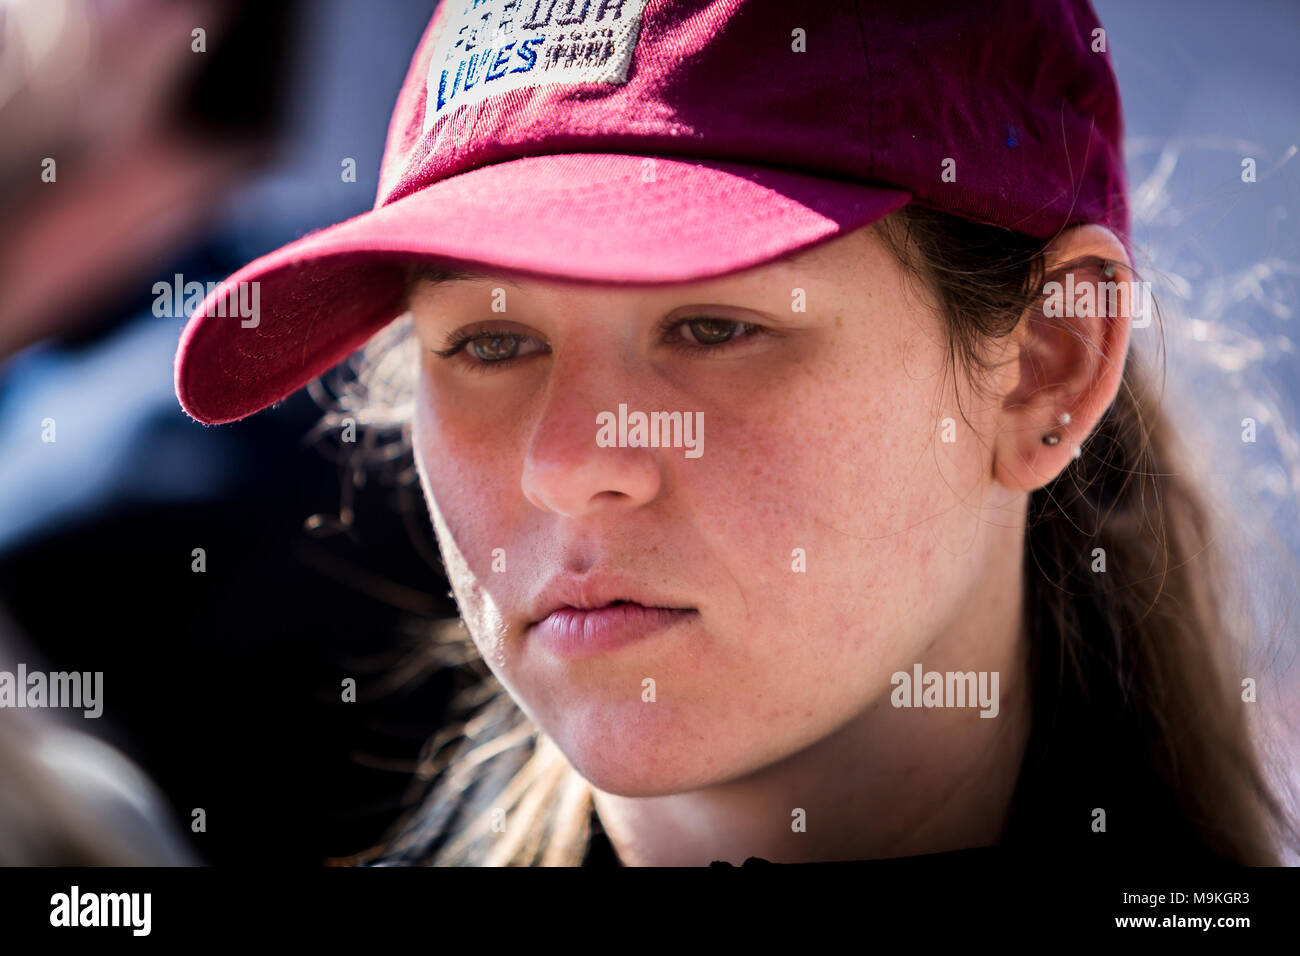 Washington Dc, United States. 24th Mar, 2018. Sarah Chadwick: 'This is not a red versus blue issue. This is a morals issue. And to the politicians that believe that their right to own a gun comes before our lives, get ready to get voted out -- by us! The future.' Credit: Michael Nigro/Alamy Live News Stock Photo